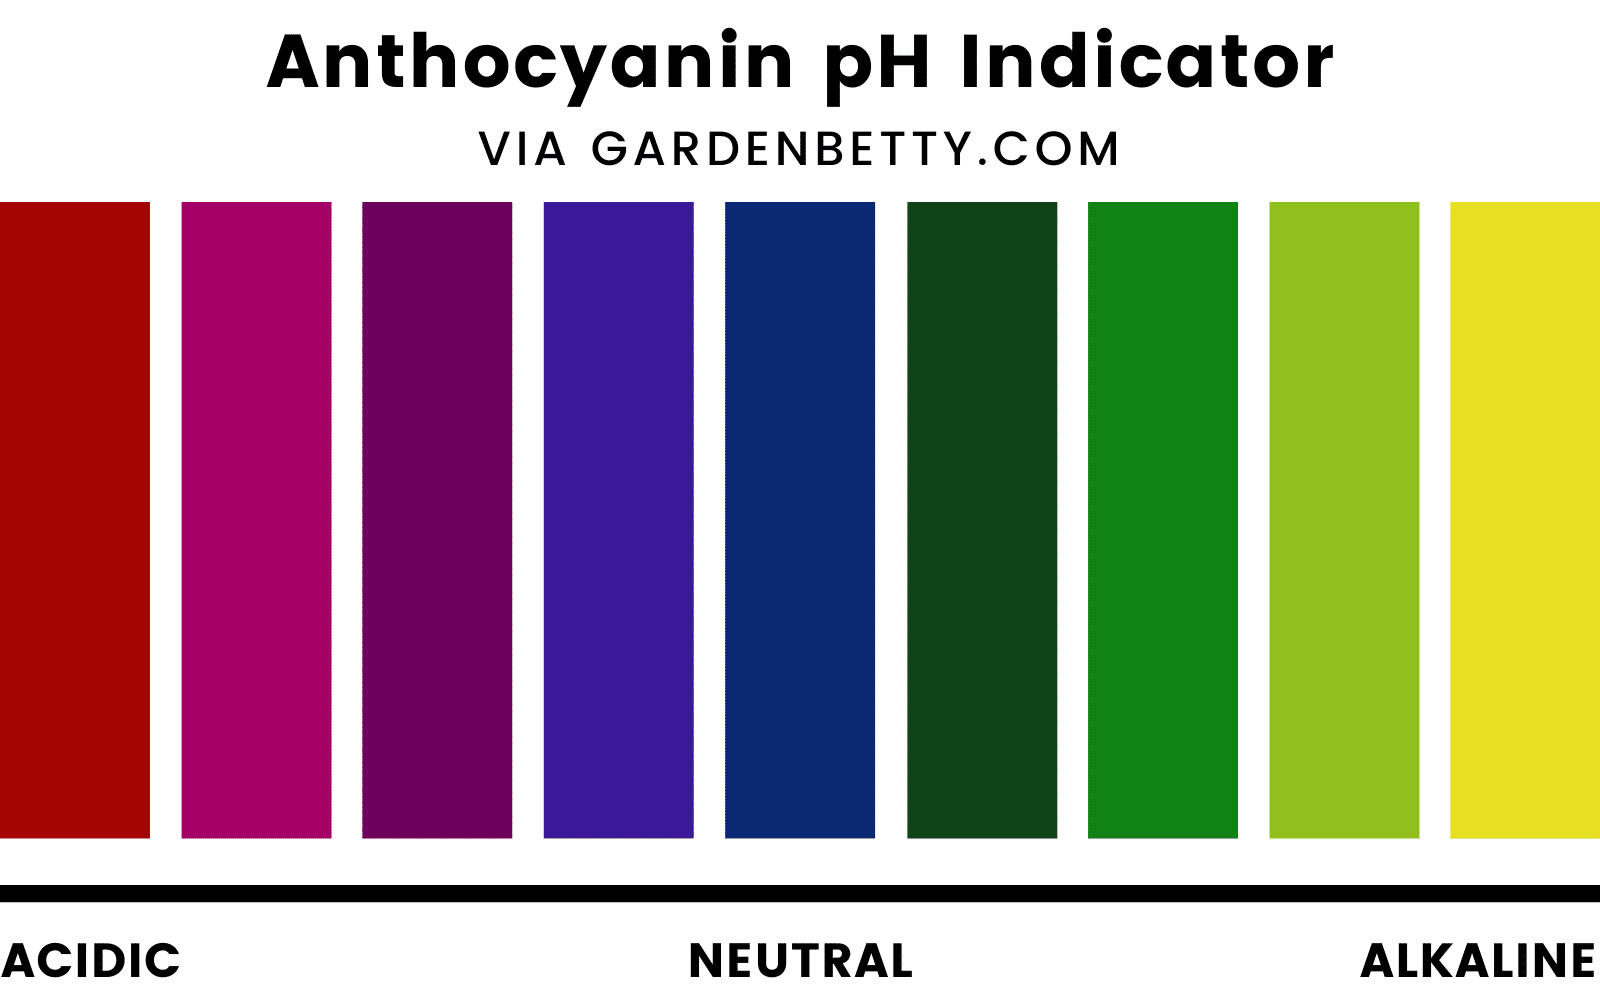 Illustration of an anthocyanin pH indicator scale going from acidic (red) to alkaline (yellow)